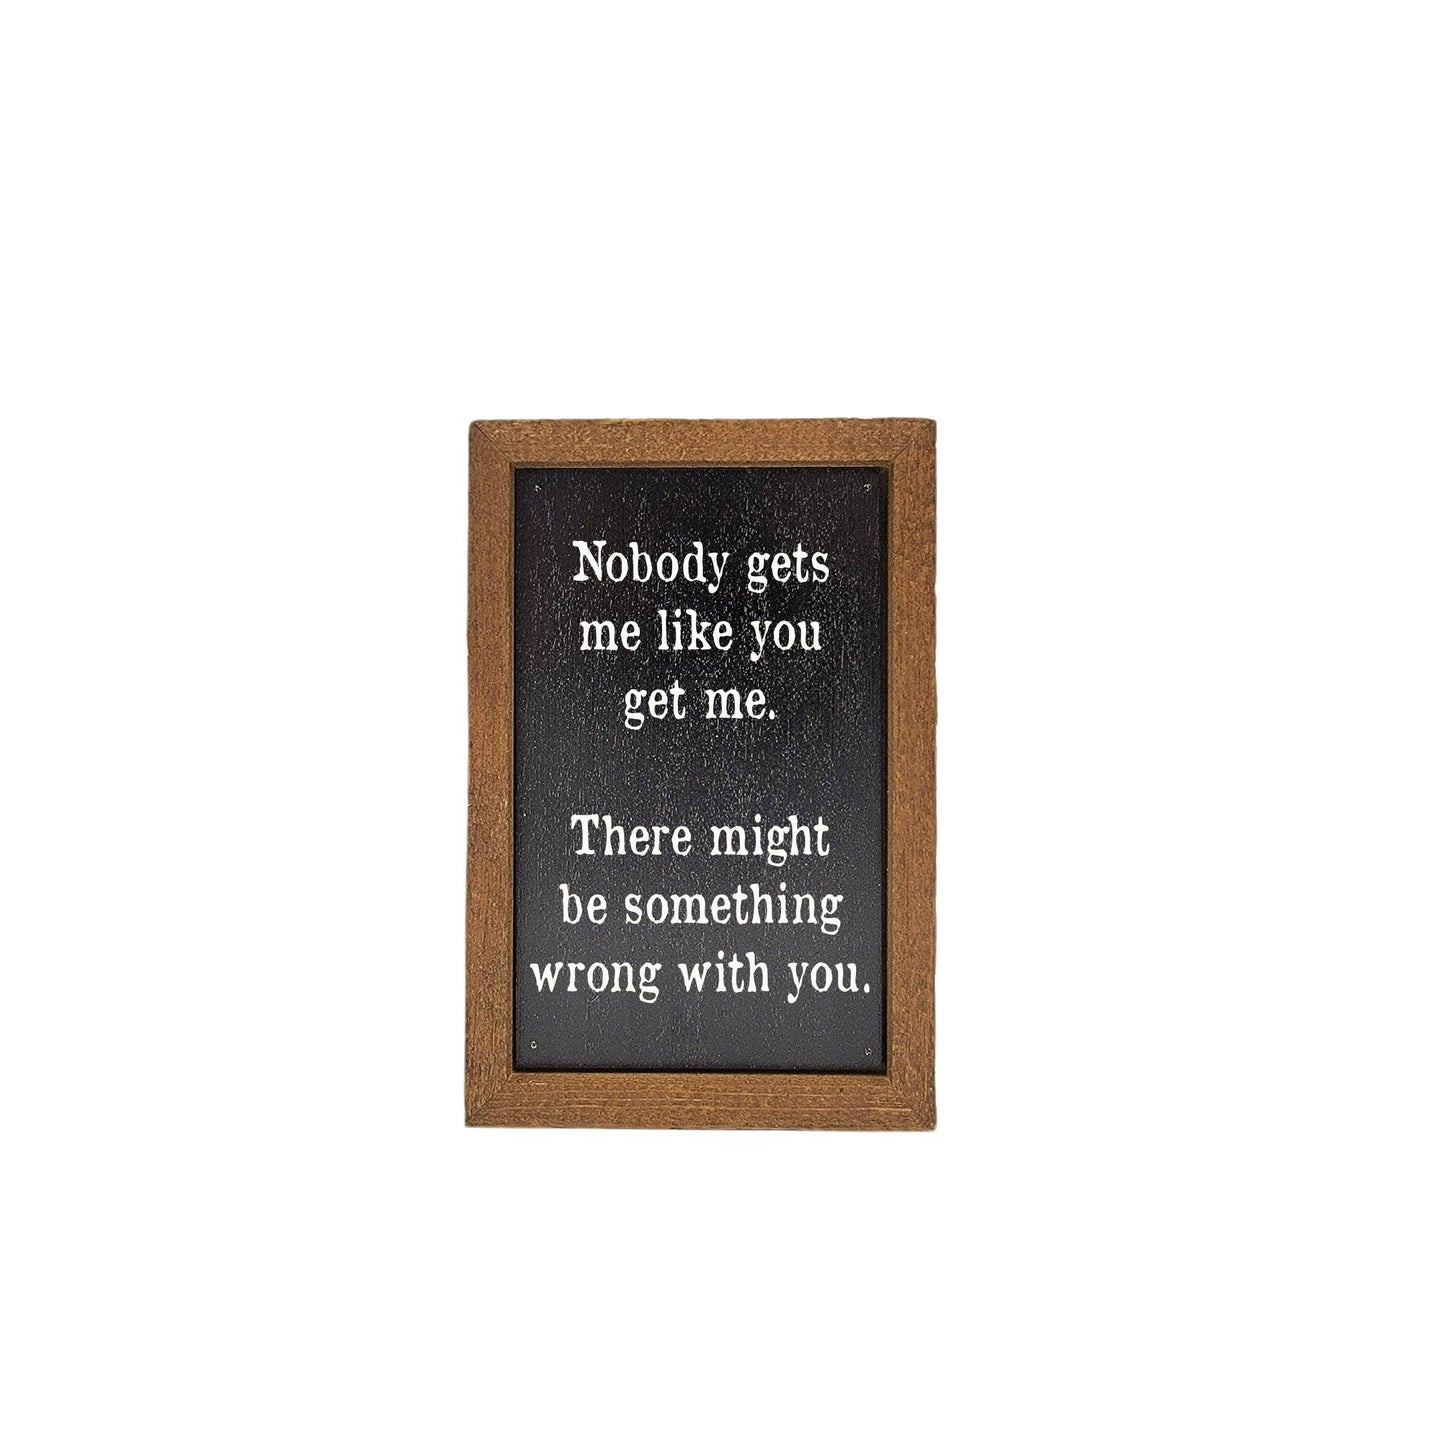 Driftless Studios - 6X4 Home Accents Somethings Wrong With You - Home Decor